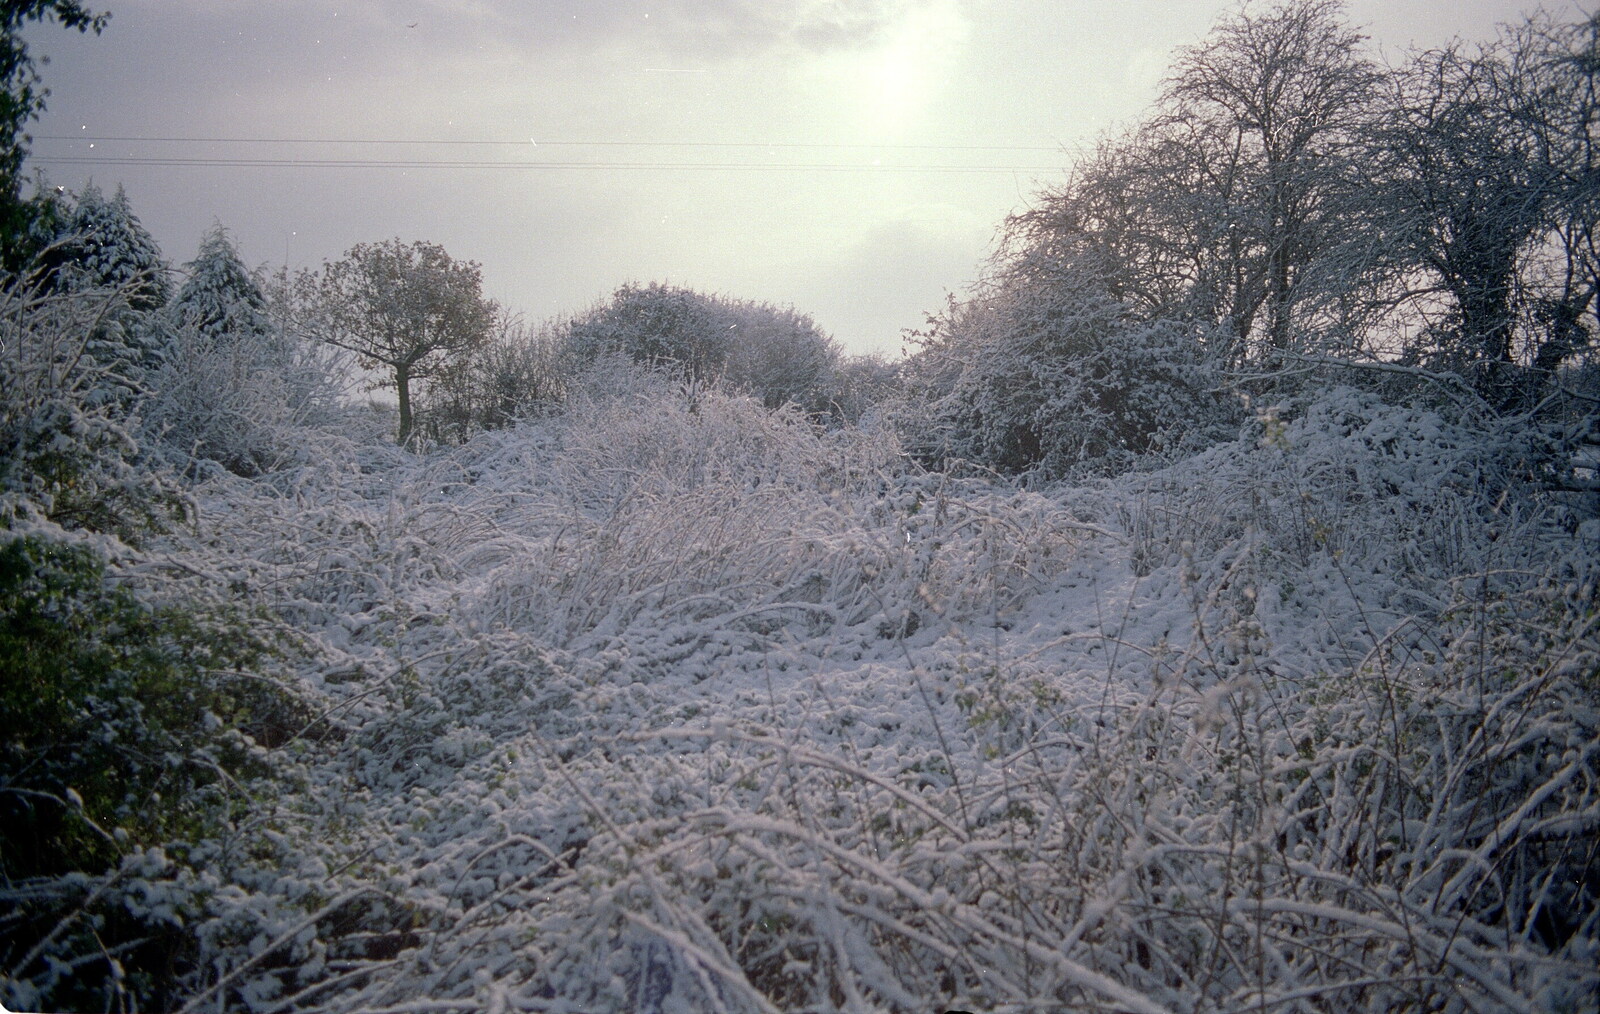 The end of the garden is snowy wilderness from New Year's Eve at the Swan Inn, Brome, Suffolk - 31st December 1994